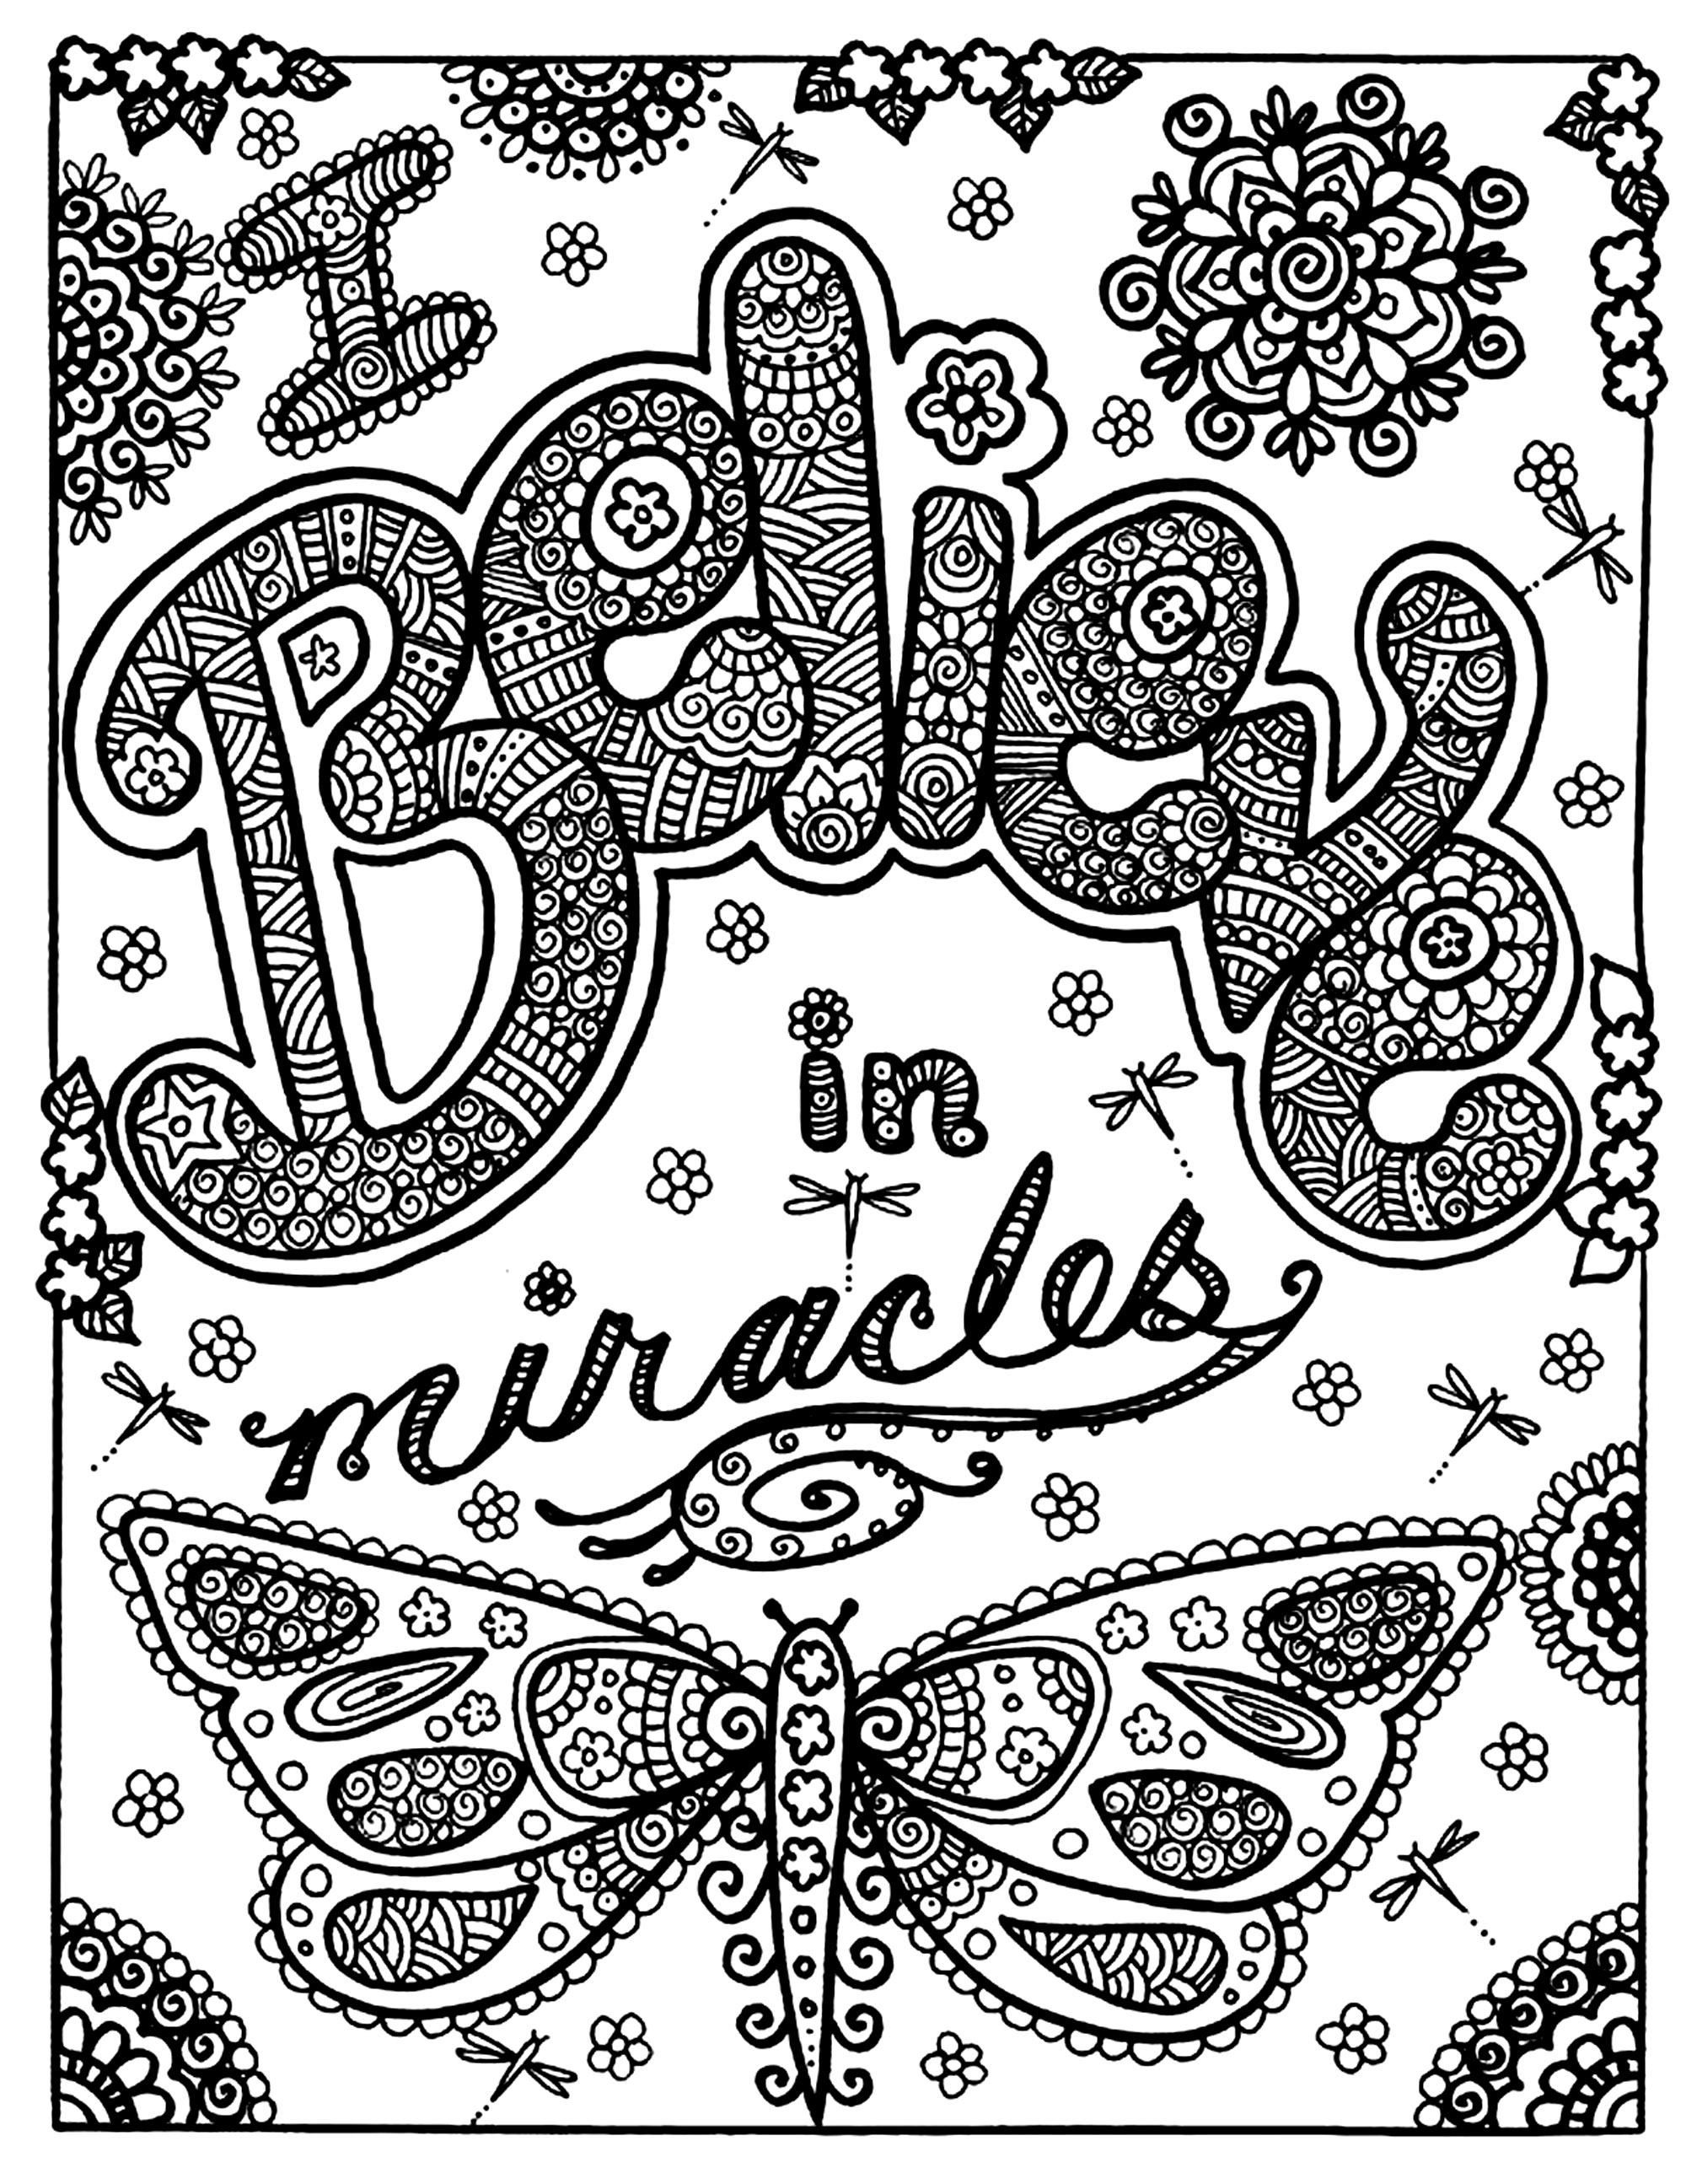 Butterfly miracle - Butterflies & insects Adult Coloring Pages